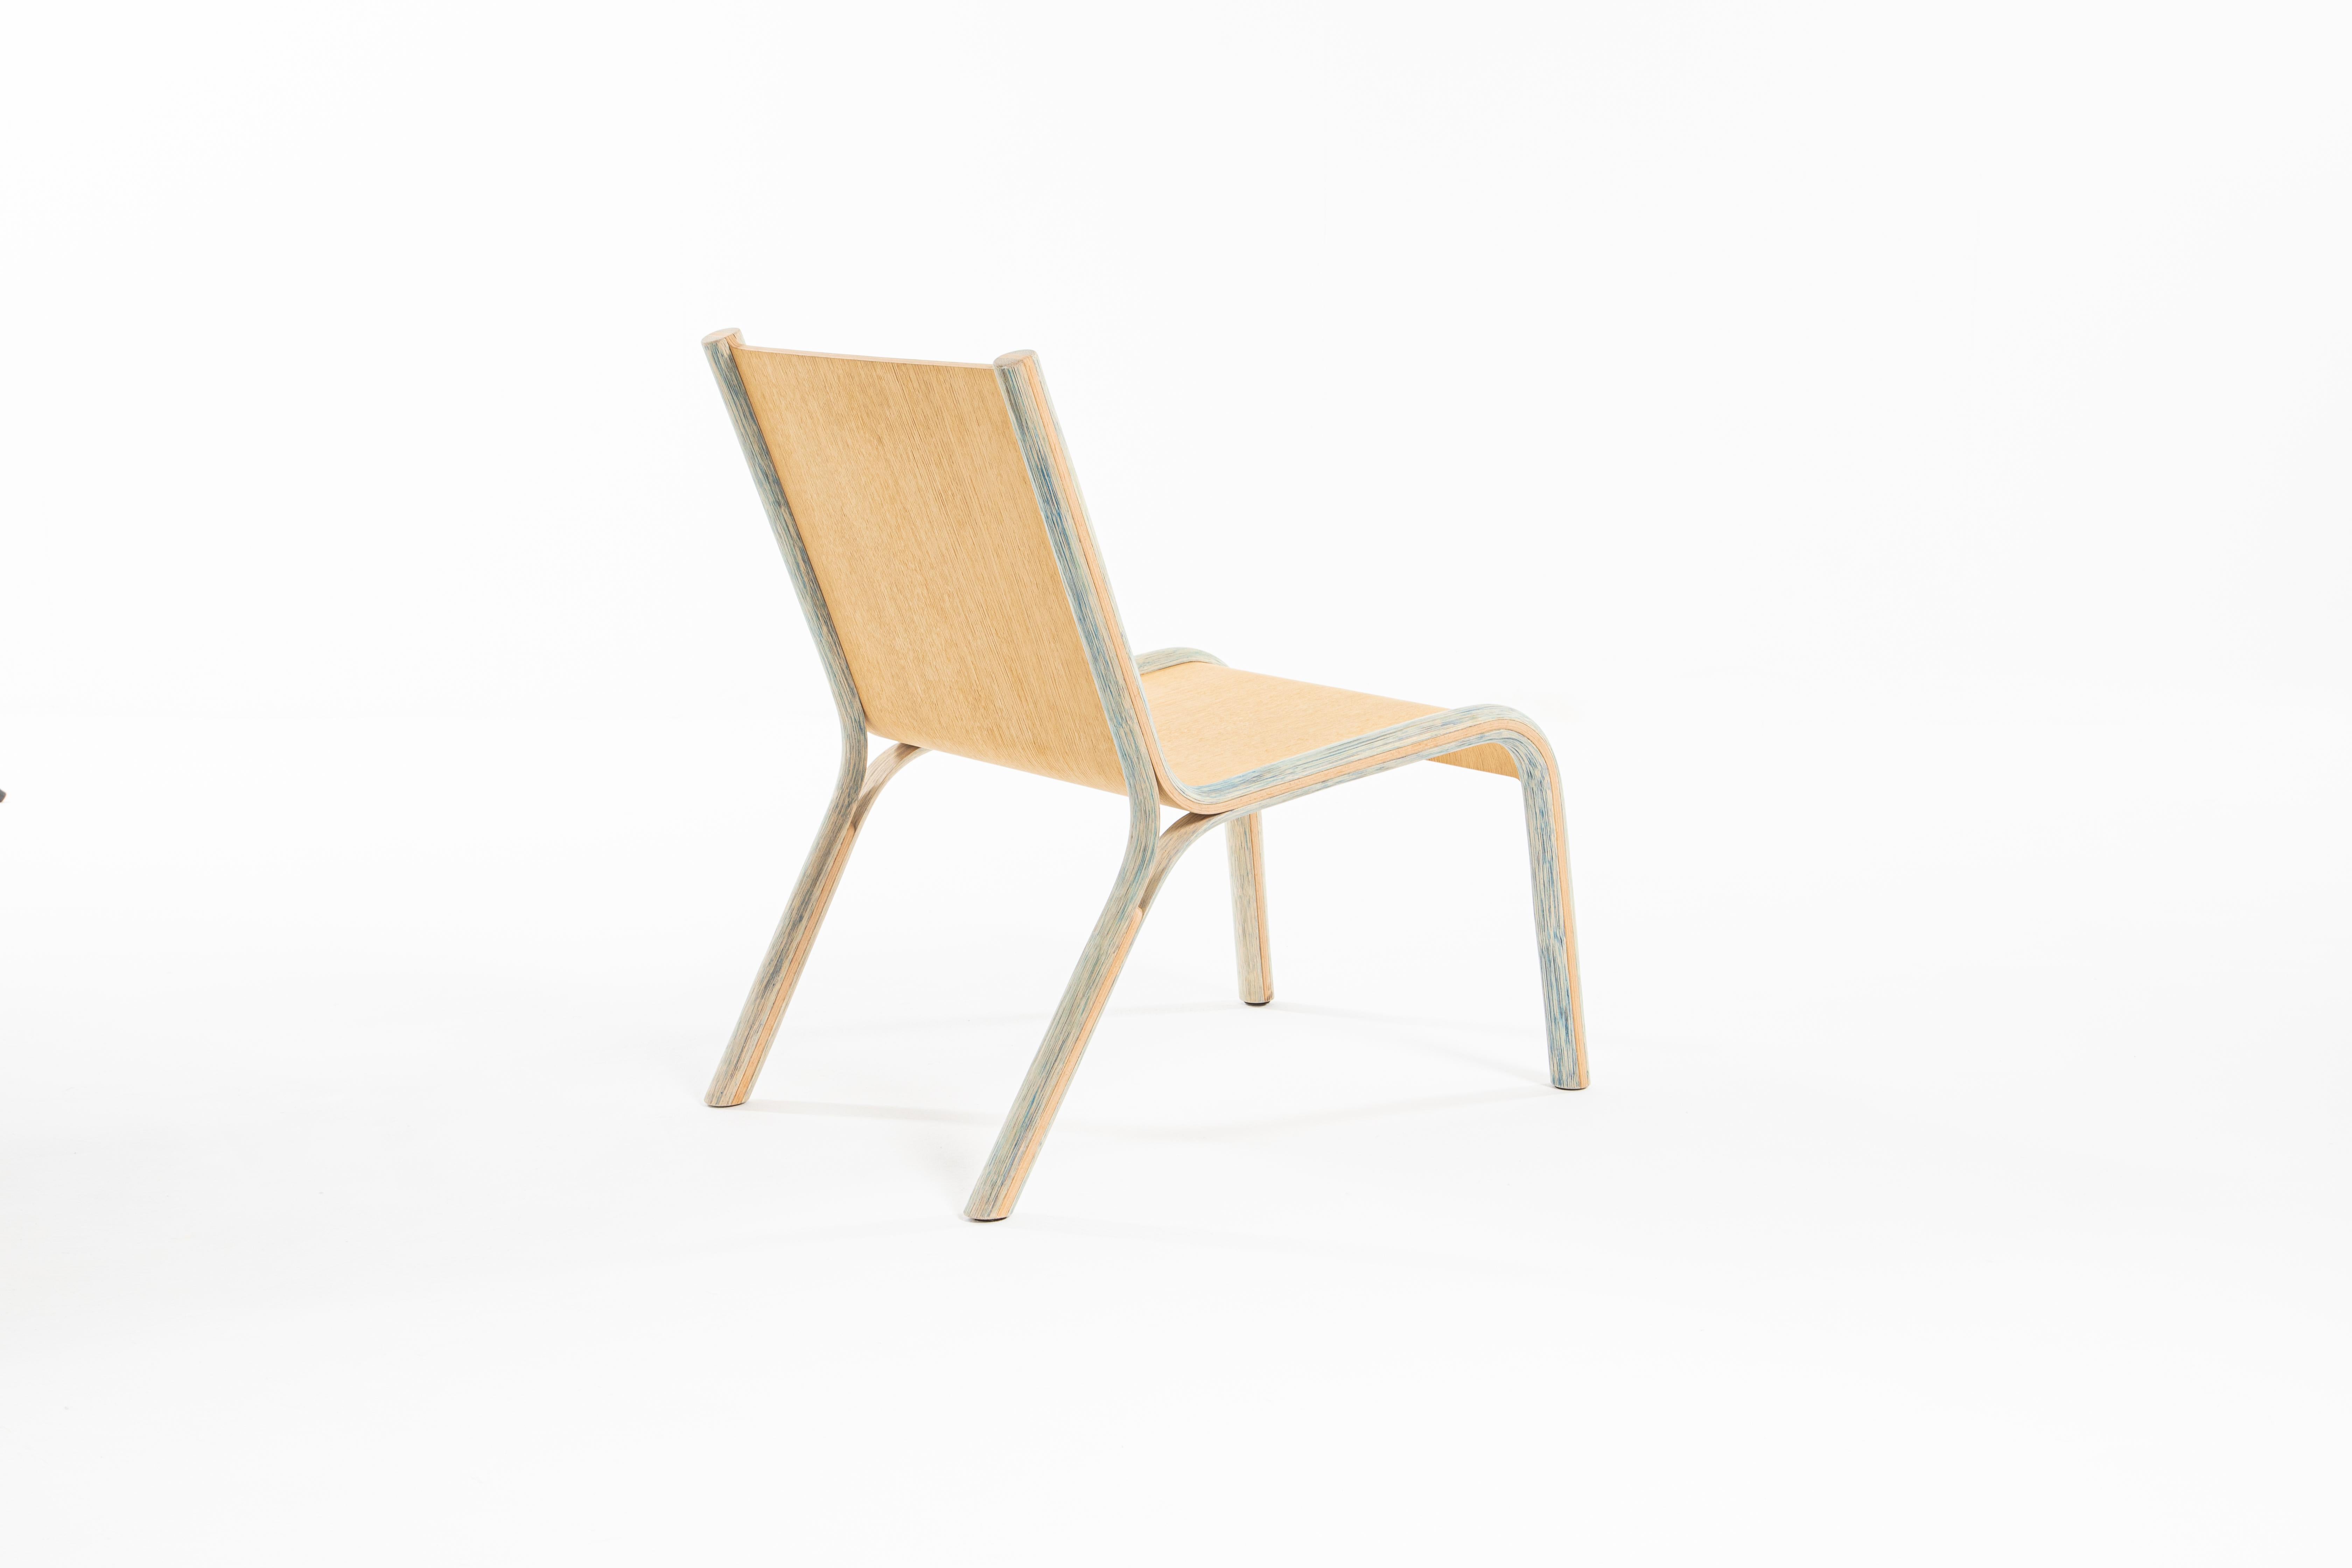 Josian chair, debarked and curved rattan and oak by 13 Desserts.
Limited edition designed by Dylan CASASNOVAS.

Josian is a lounge chair produced in rattan and molded oak plywood.
In his design, the designer took advantage of the flexibility and